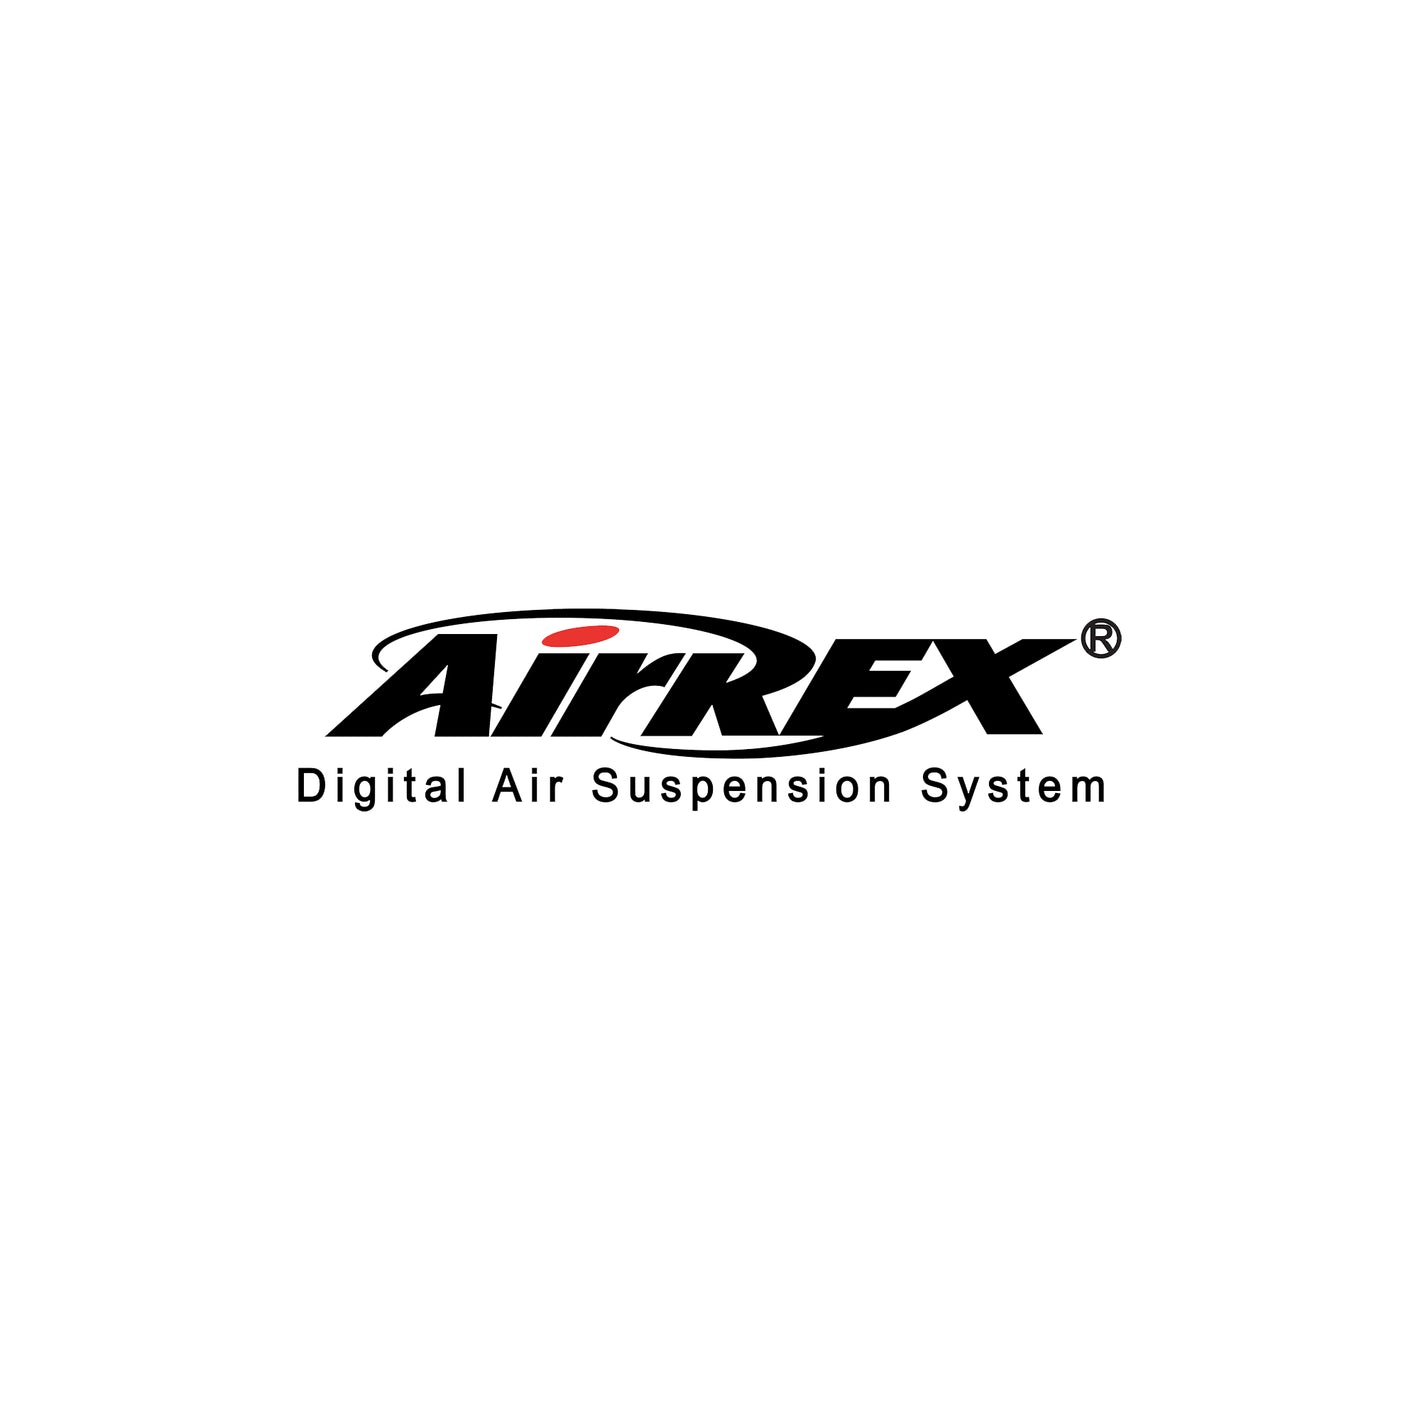 All AirREX Products